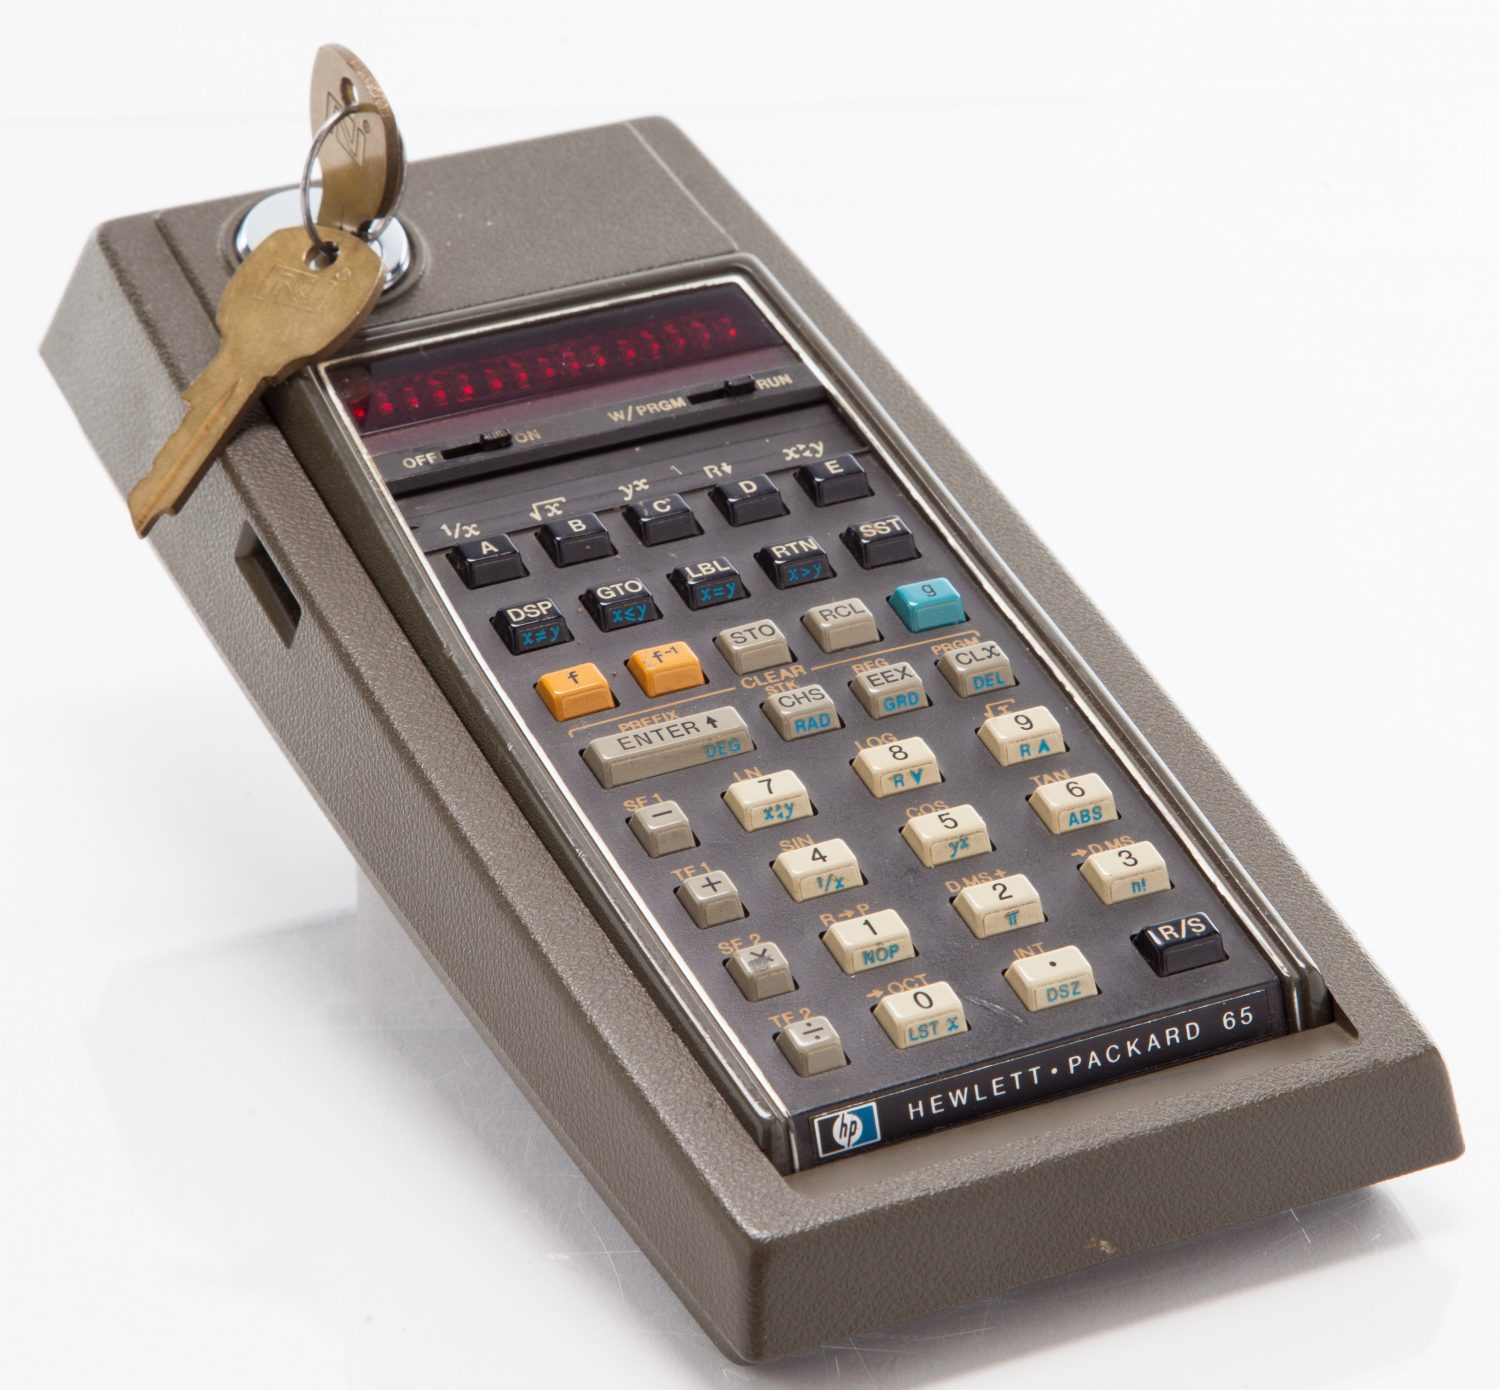 Photo of the HP 65 calculator in its locking cradle with key in the lock.